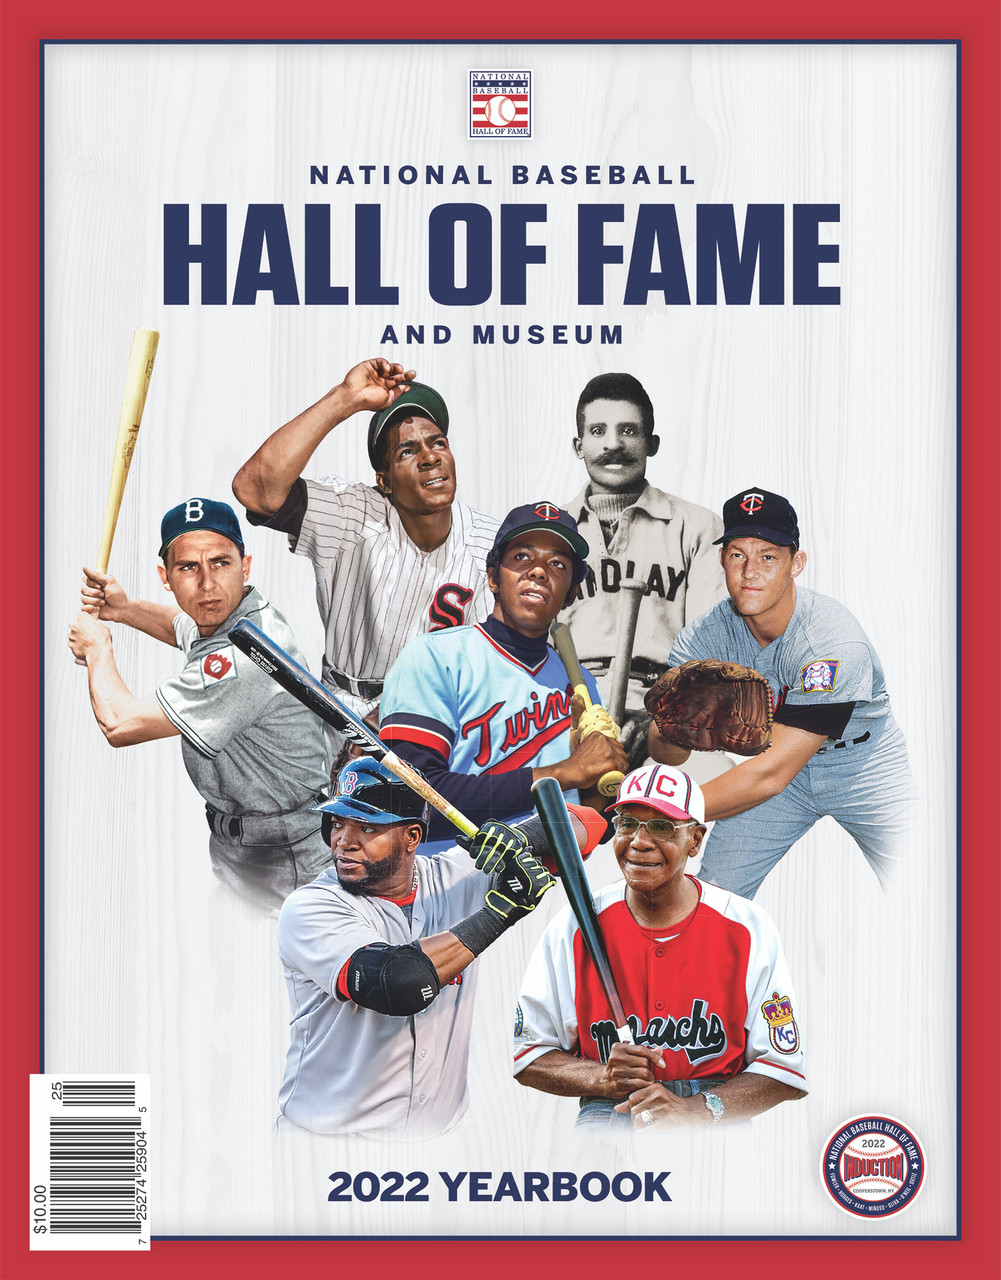 2022 Baseball Hall of Fame Yearbook - Official Super Bowl Program